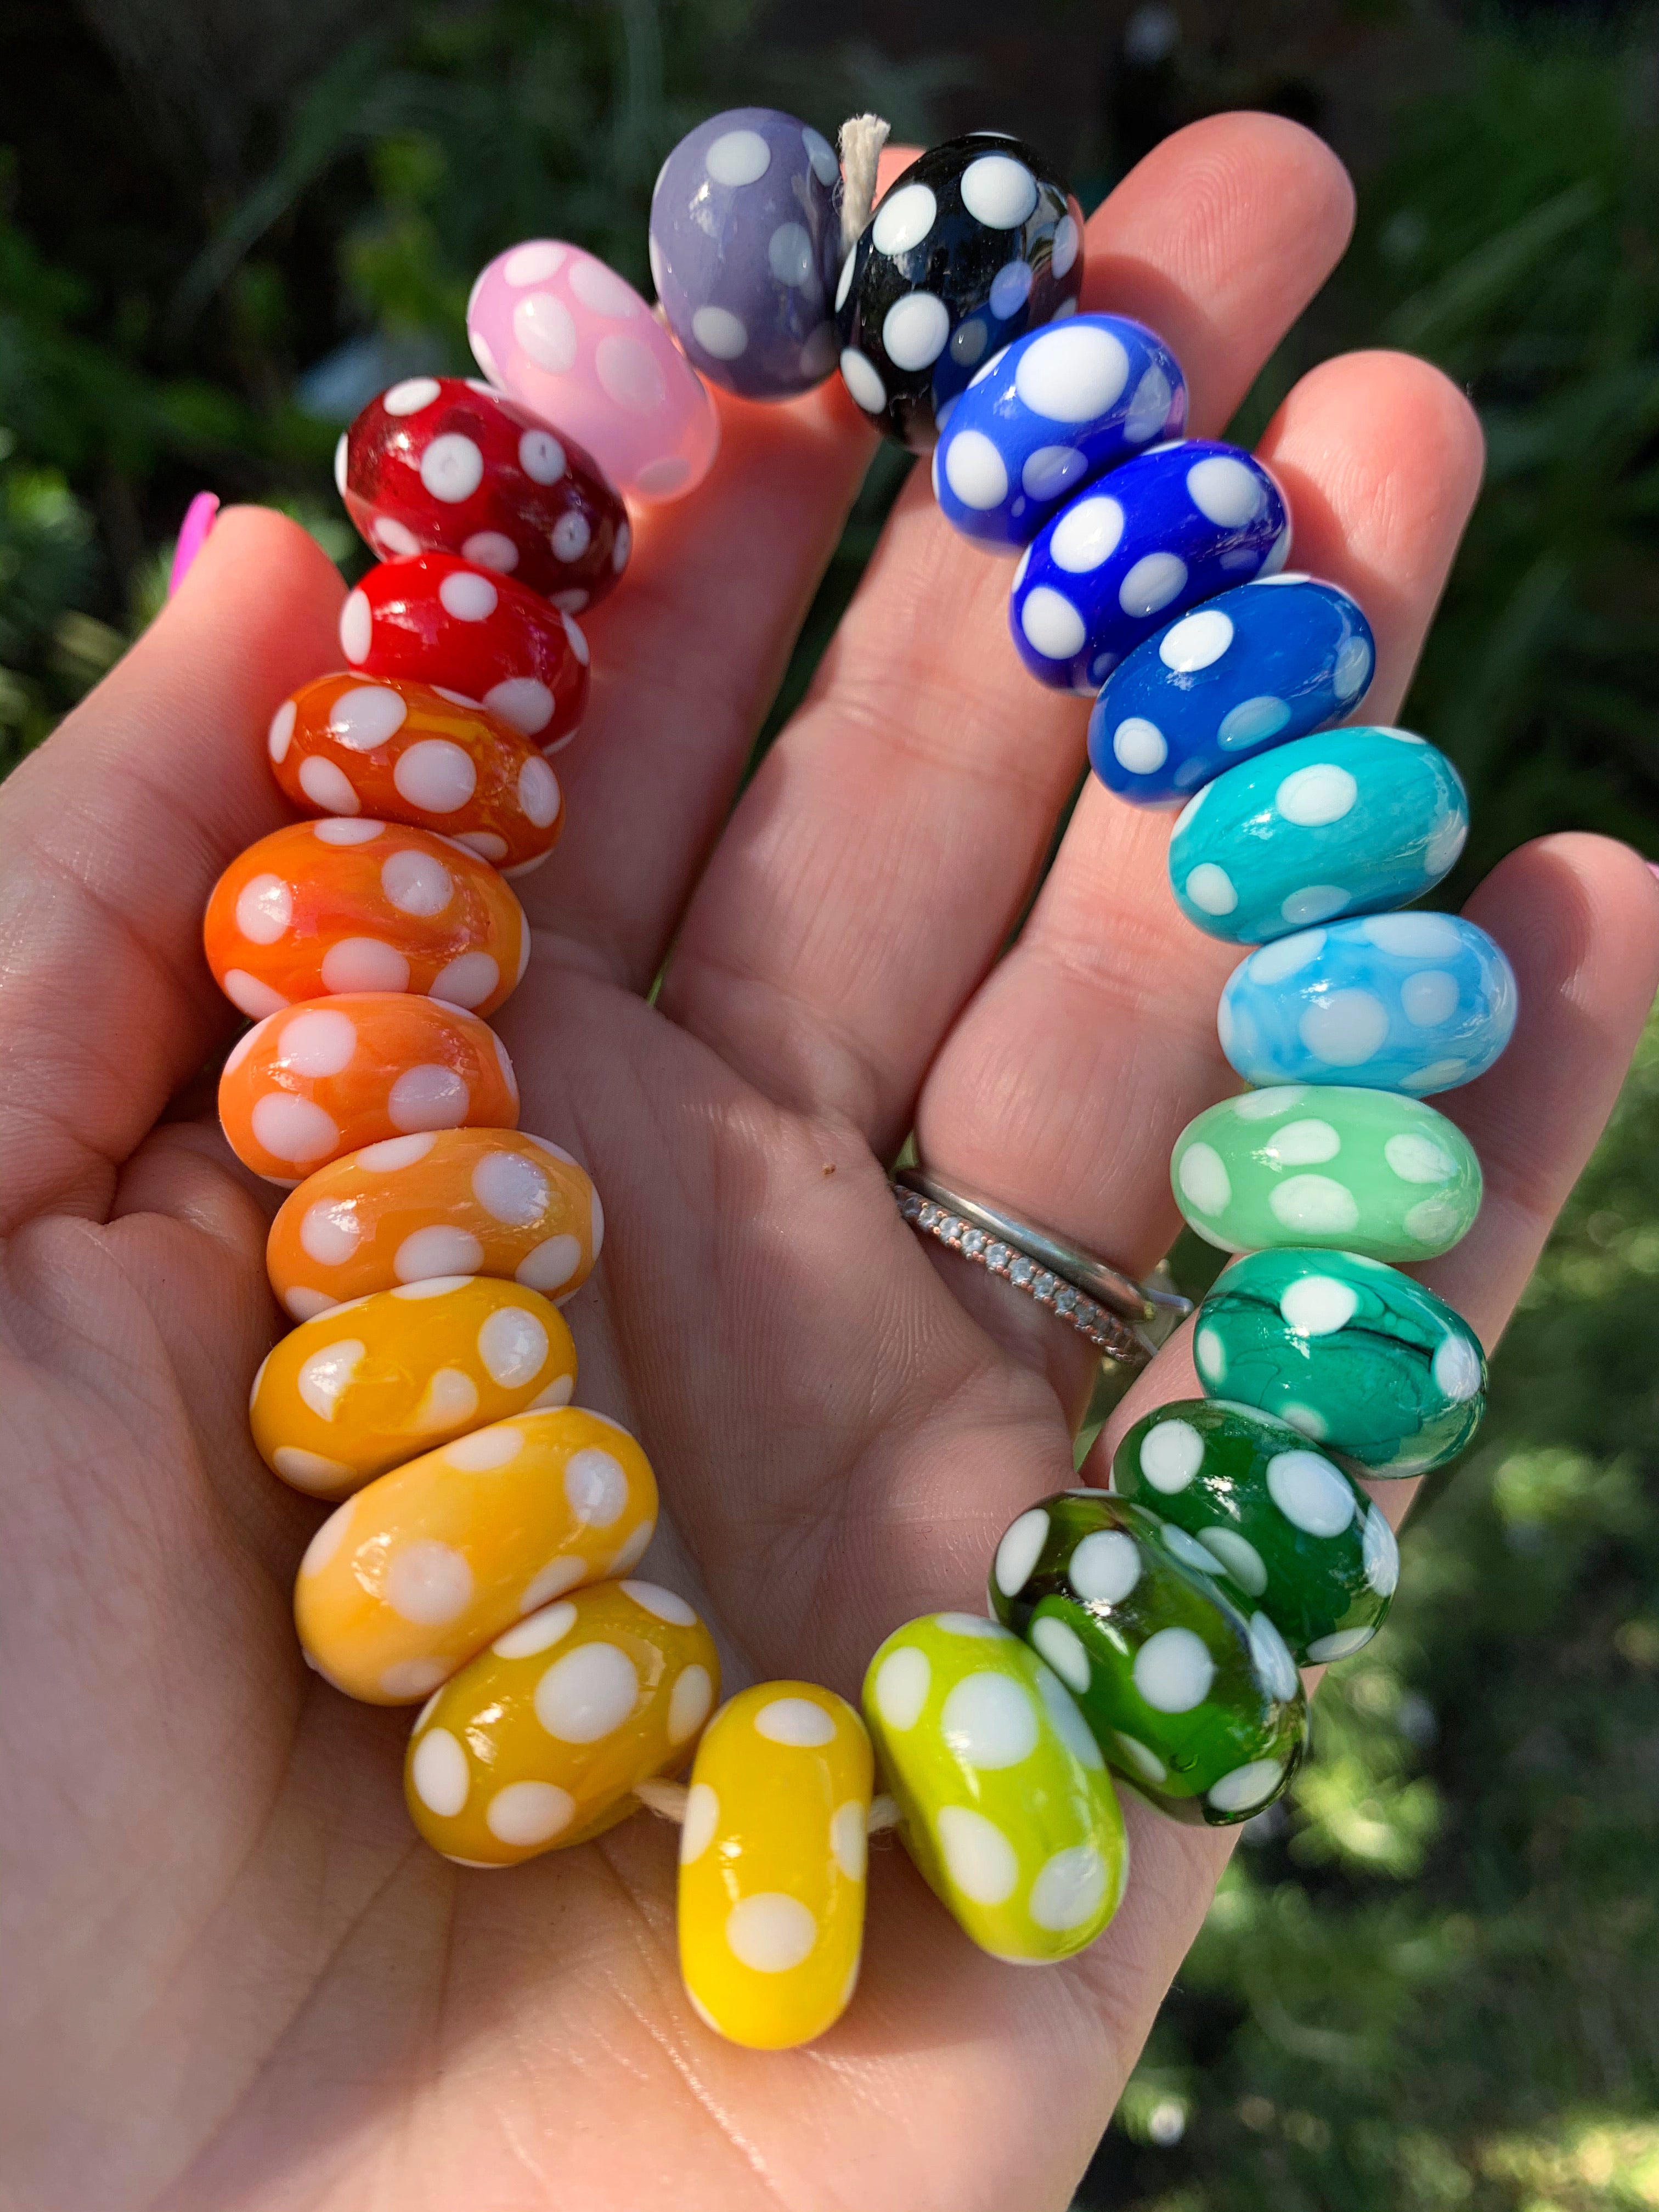 Set of 23 polka dots handcrafted glass beads in rainbow colors